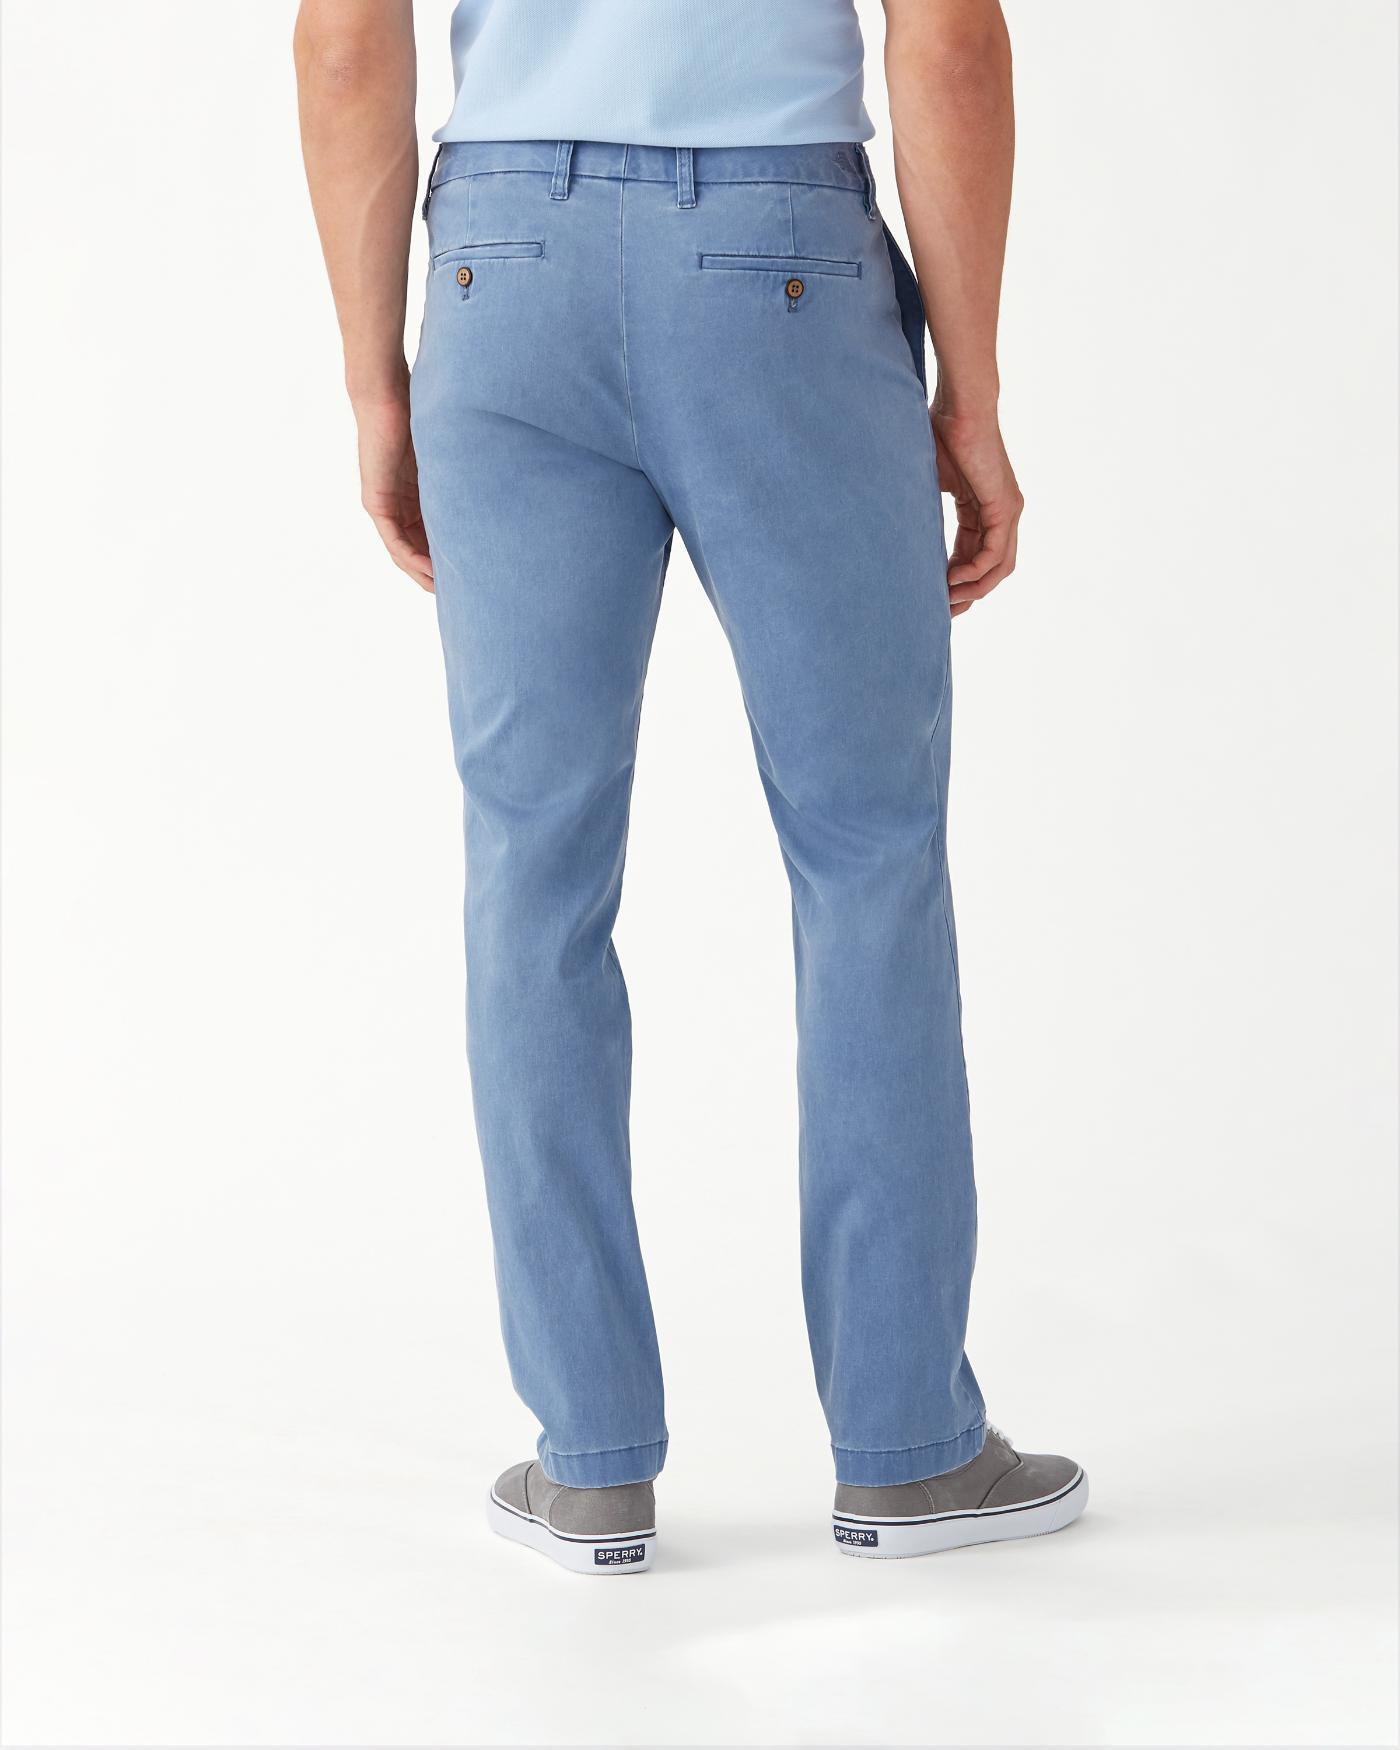 Tommy Bahama Cotton Boracay Flat-front Chino Pants in Blue for Men - Lyst